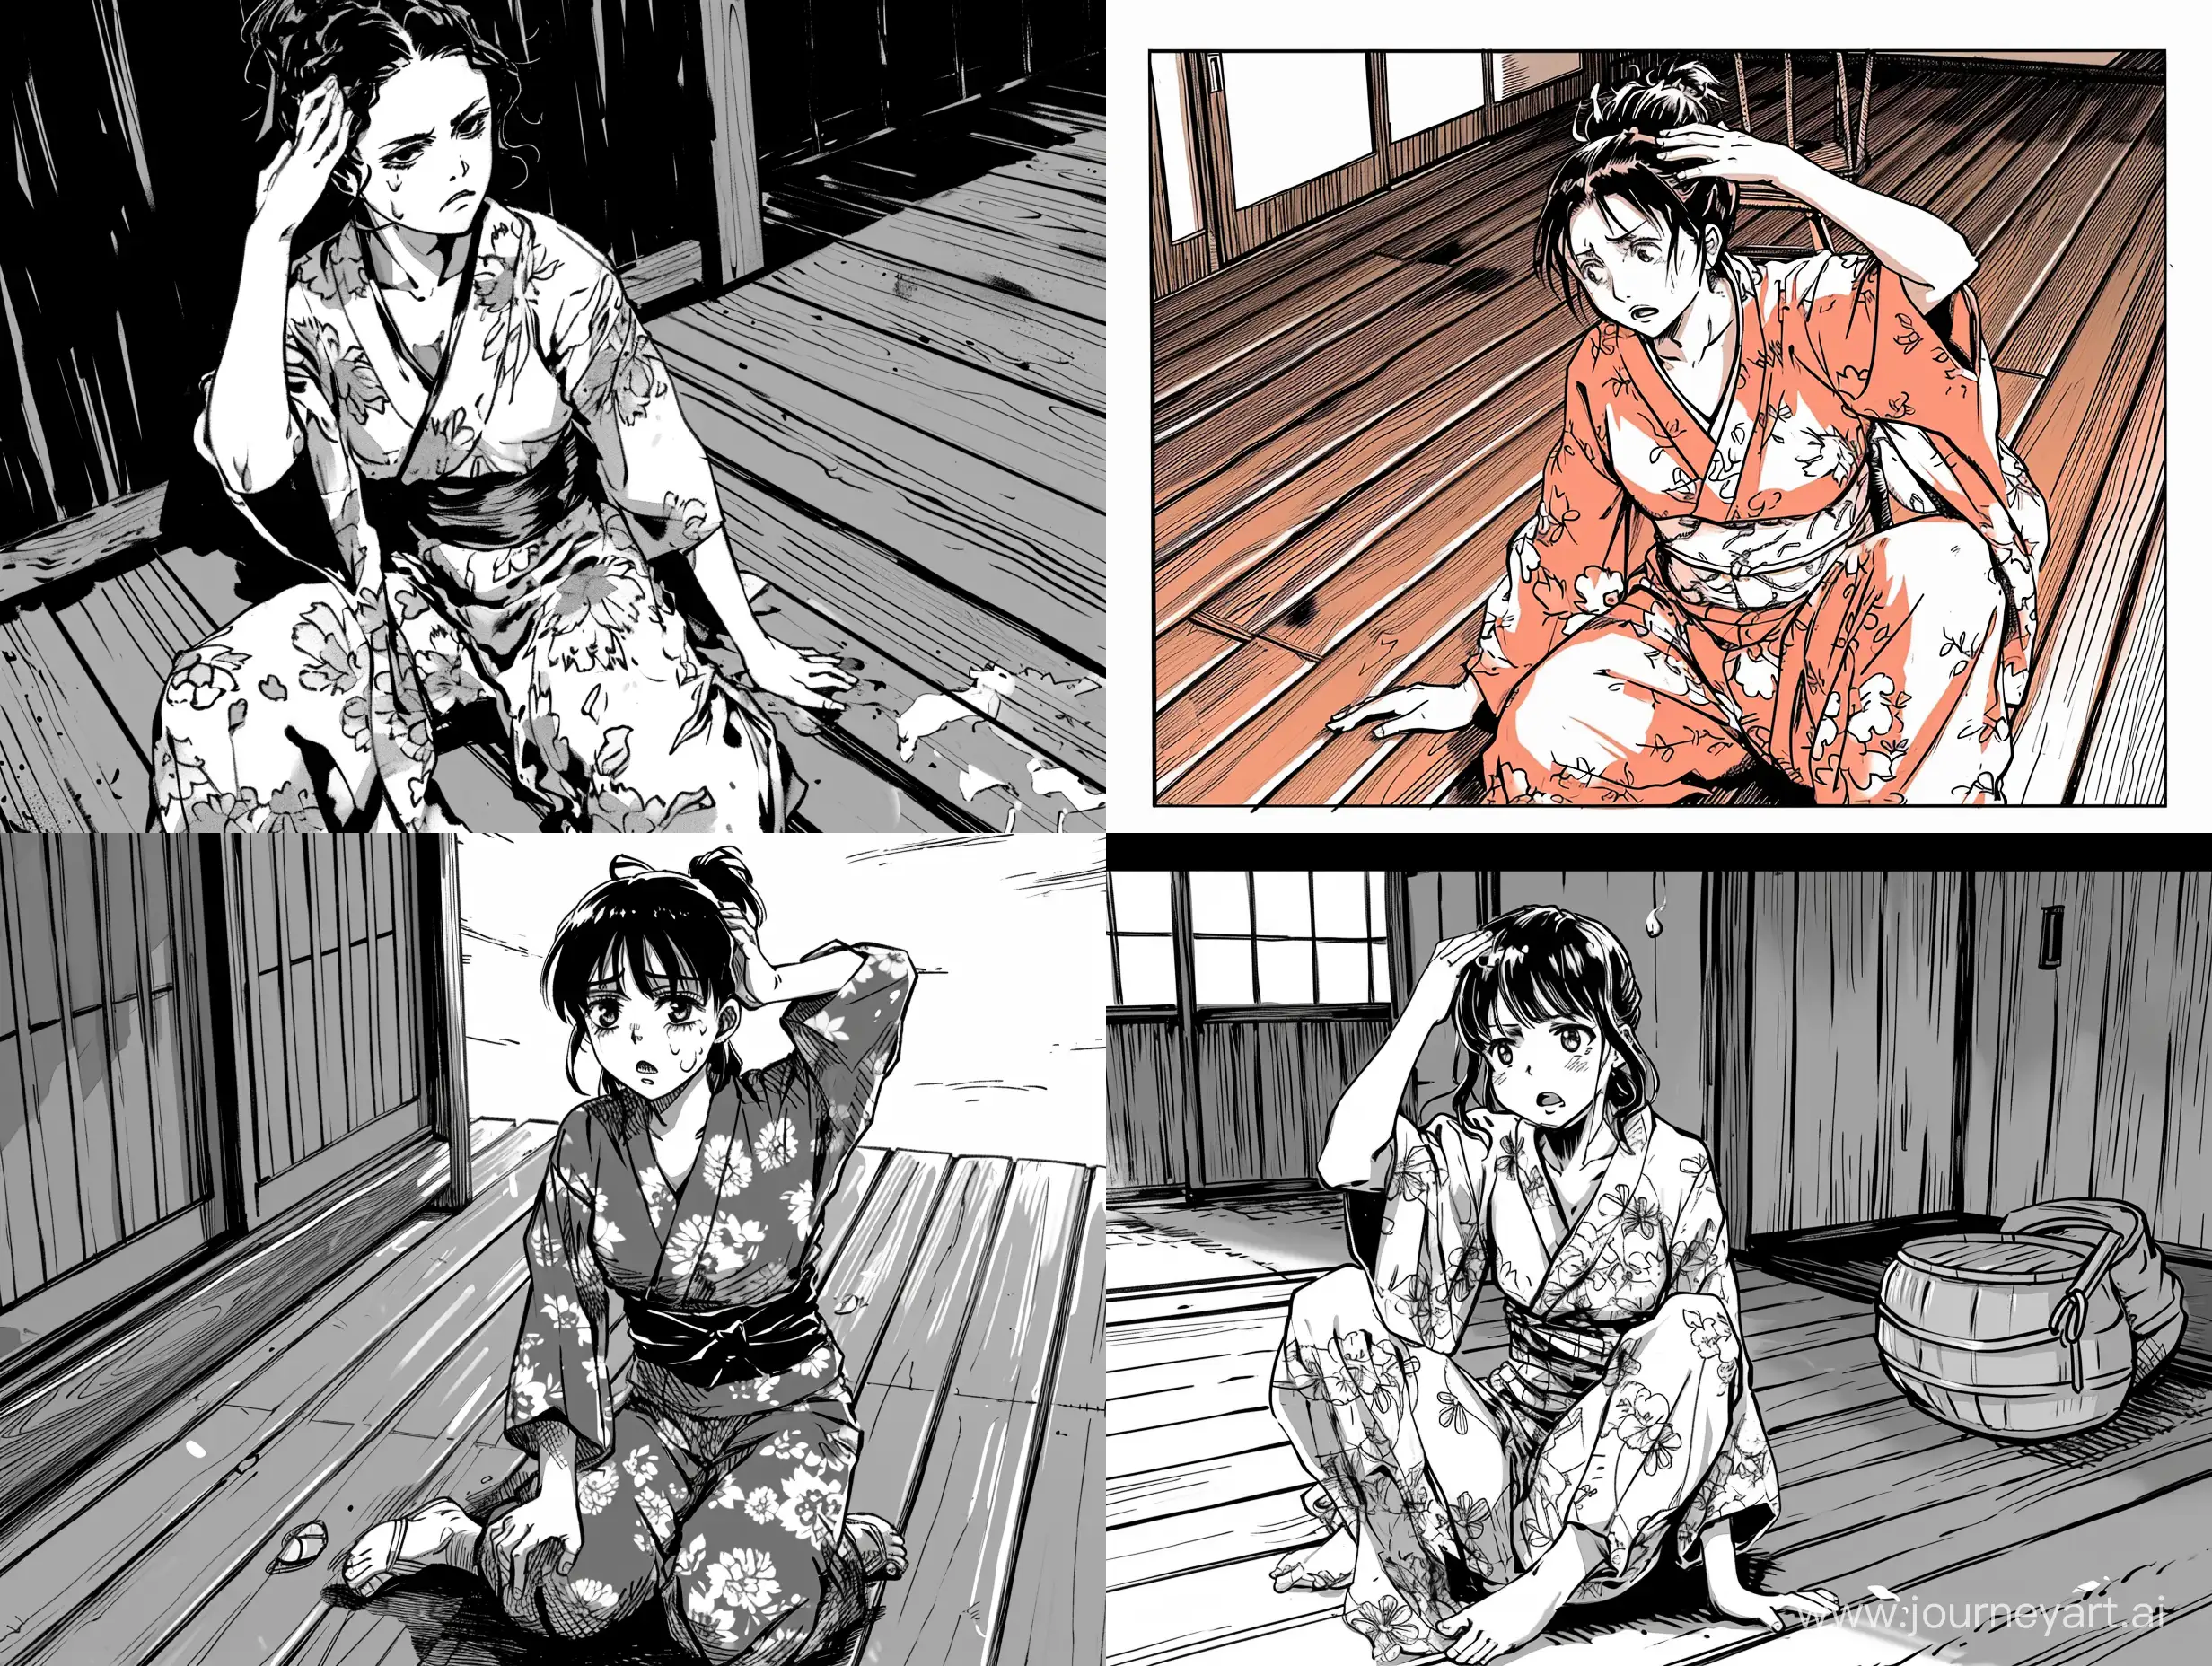 Japanese-Woman-in-Kimono-Expresses-Painful-Emotion-on-Wooden-Floor